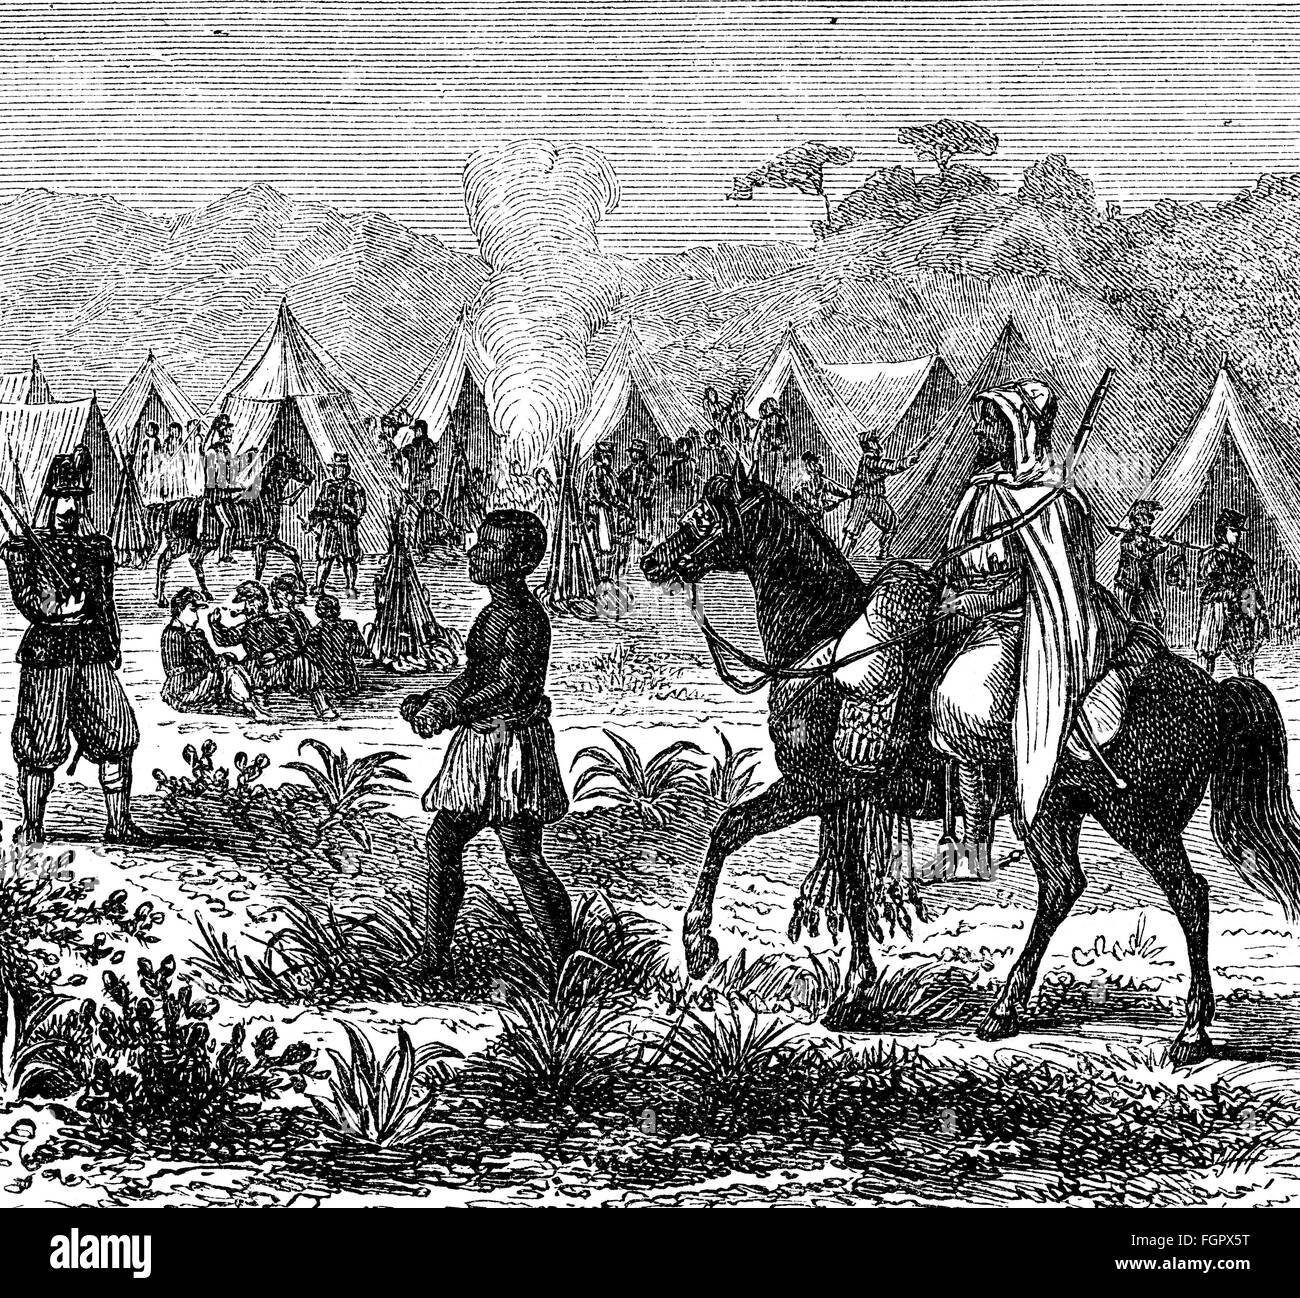 military,France,French Foreign Legion(Legion Etrangere),camp in Algeria,a Spahi brings a prisoner,wood engraving,19th century,bivouac,legionary,legionnaire,legionaries,auxiliary troops,auxilaries,aux troops,ancillary troops,auxiliary forces,Spahis,Sipahi,Sipahis,Africa,Black African,Africans,tent,tents,tent camp,tent camps,rider,riders,cavalryman,cavalrymen,riding,horse,horses,French,colonial supremacy,colonial rule,colonialism,colony,colonies,dependency,dependencies,colonial soldiers,soldier,historic,historical,peo,Additional-Rights-Clearences-Not Available Stock Photo